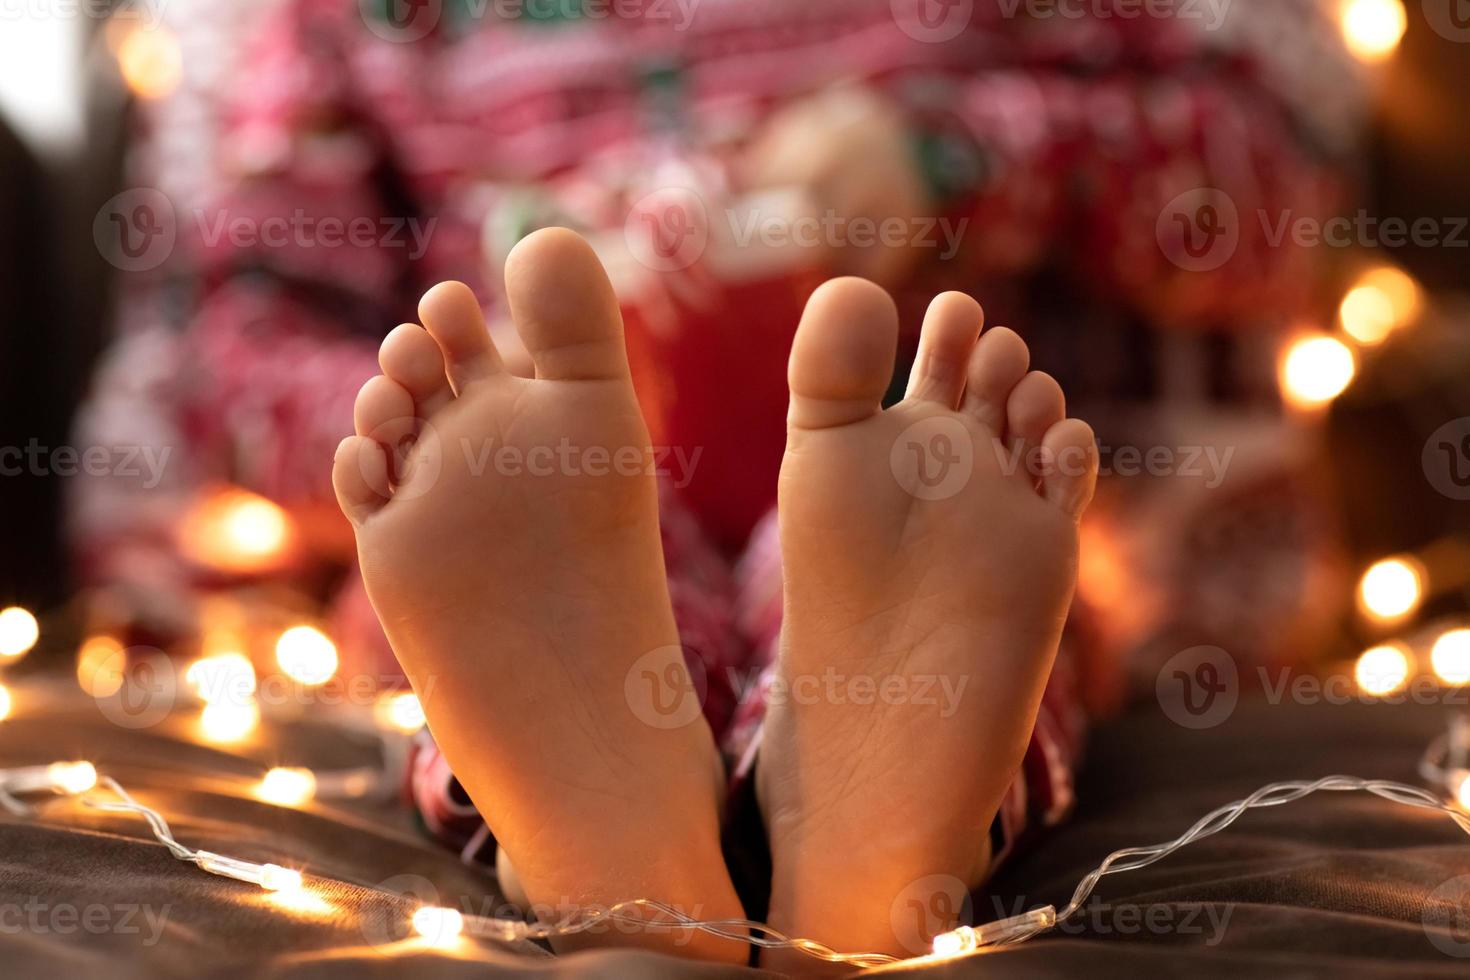 Close up Child bare feet Kid in red Christmas pajamas hold mug cup striped green red candy Christmas canes bokeh lights background. New year photo